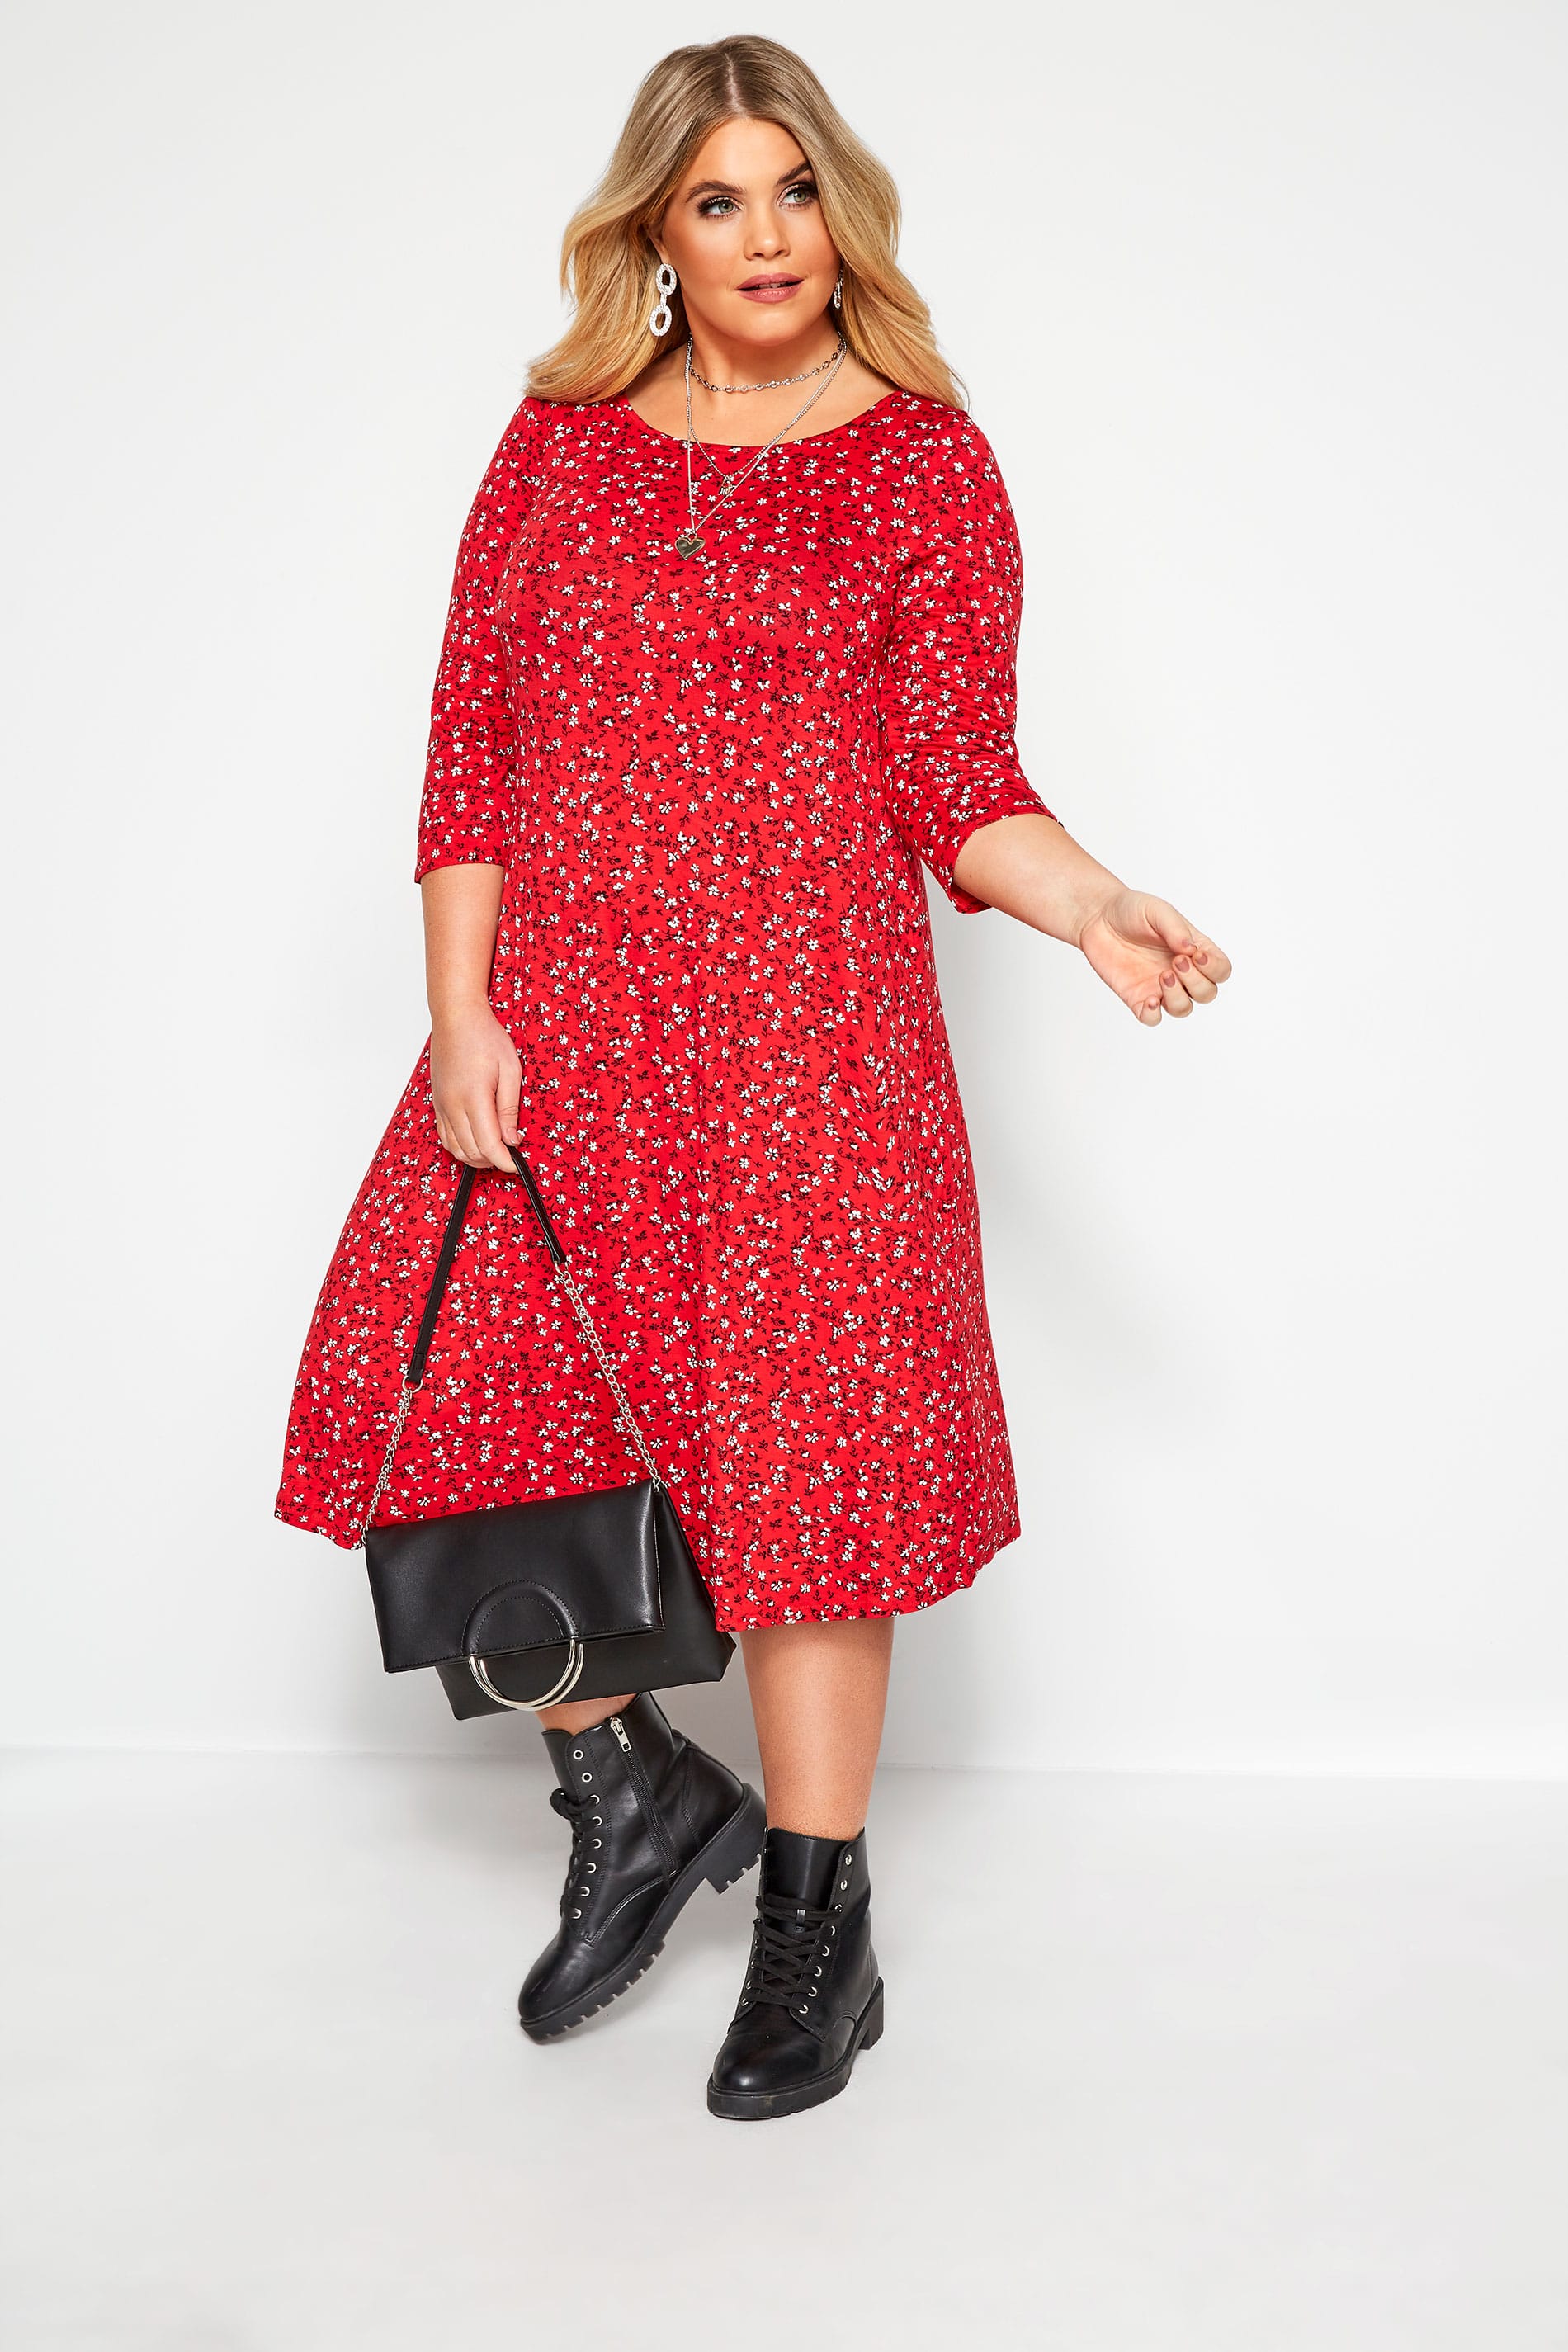 Red Ditsy Floral Swing Dress | Sizes 16-36 | Yours Clothing 2